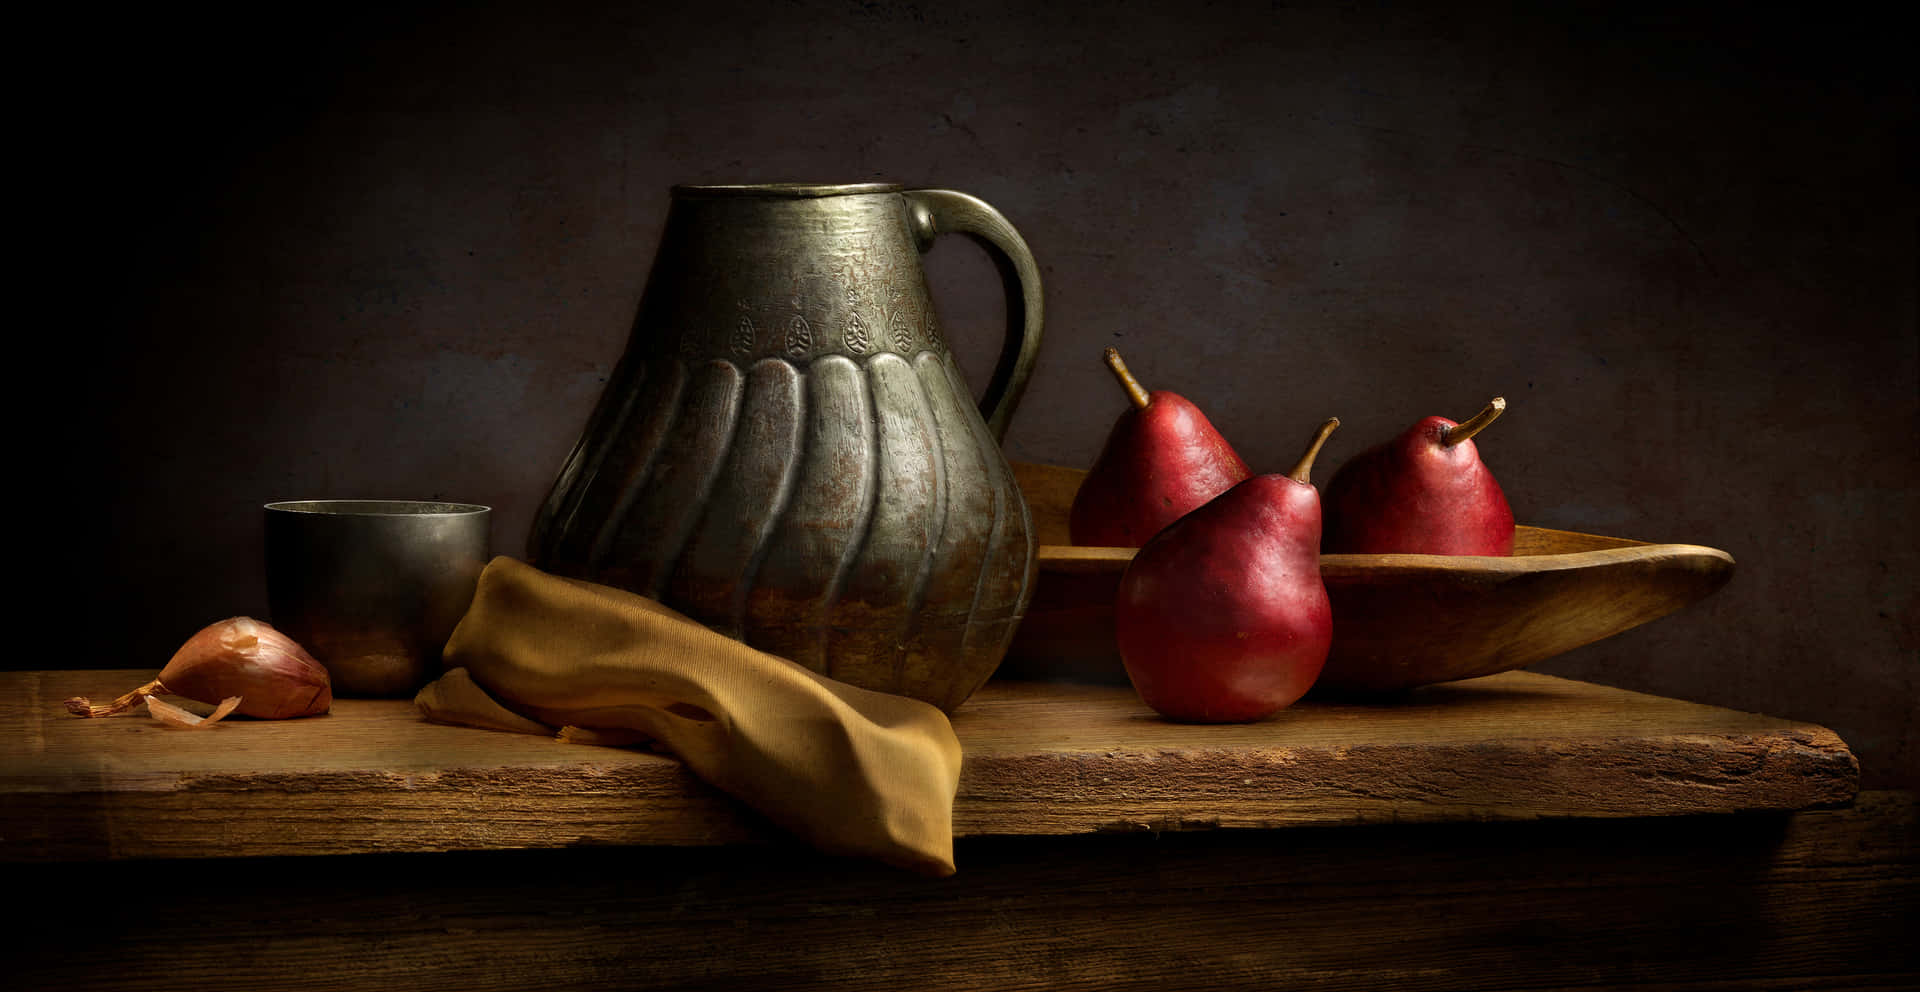 Red Pears Still Life Picture